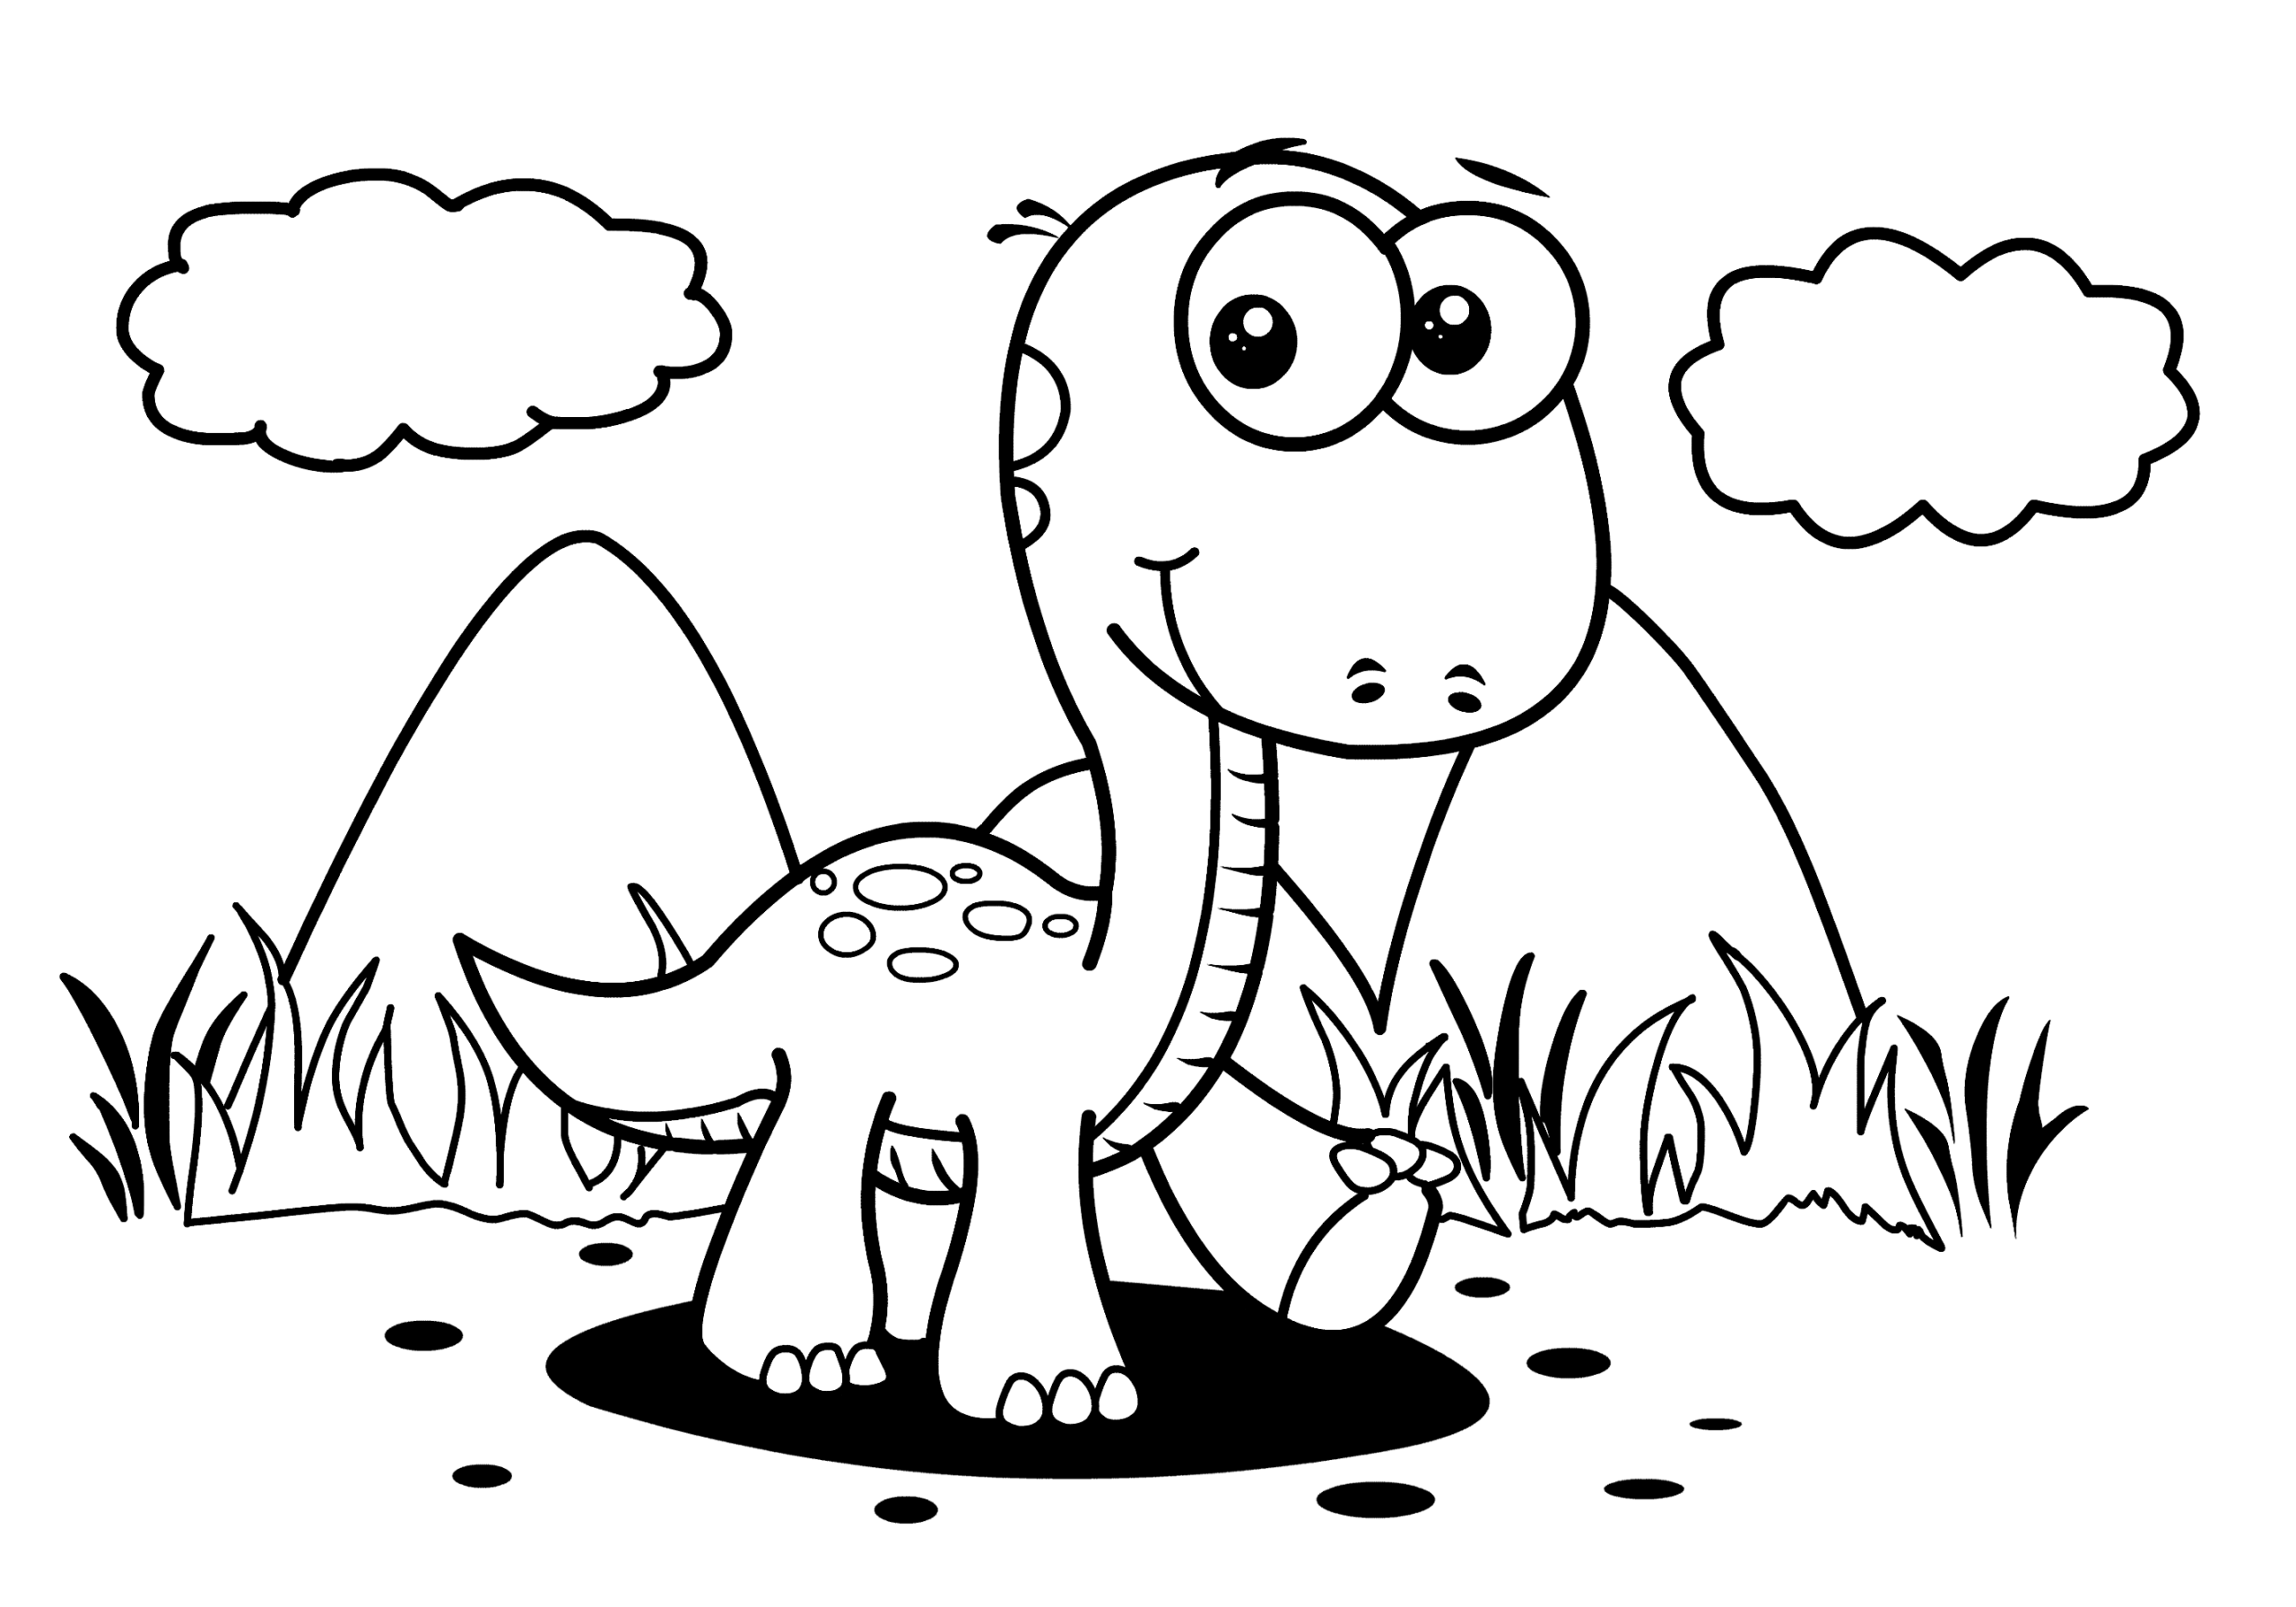 Dinosaur Coloring Pages (Updated): Printable PDF